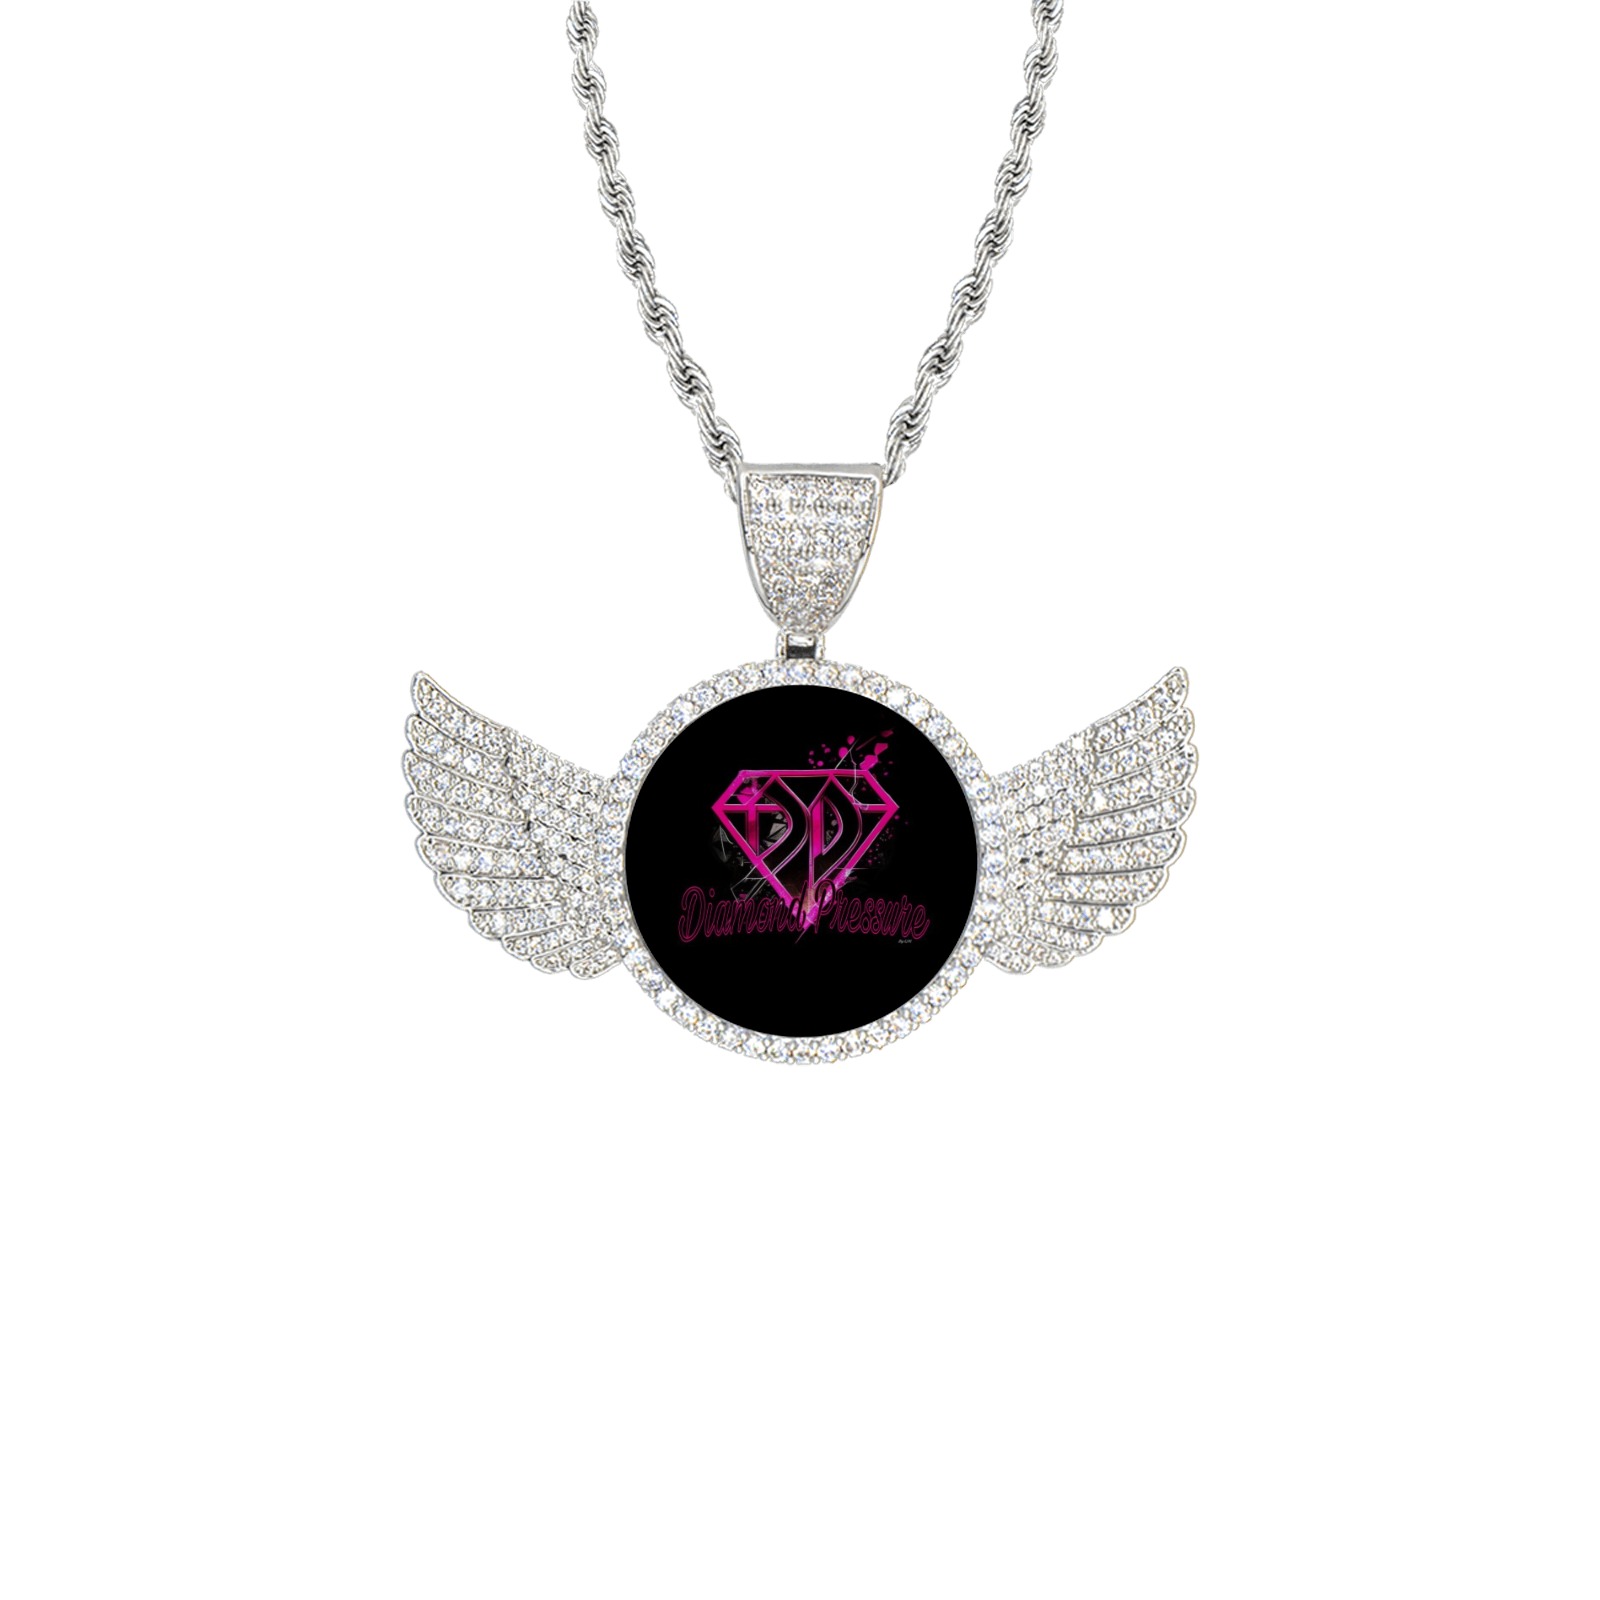 C8D35426-E53C-498A-8EA6-A0B7A649A6BC Wings Silver Photo Pendant with Rope Chain